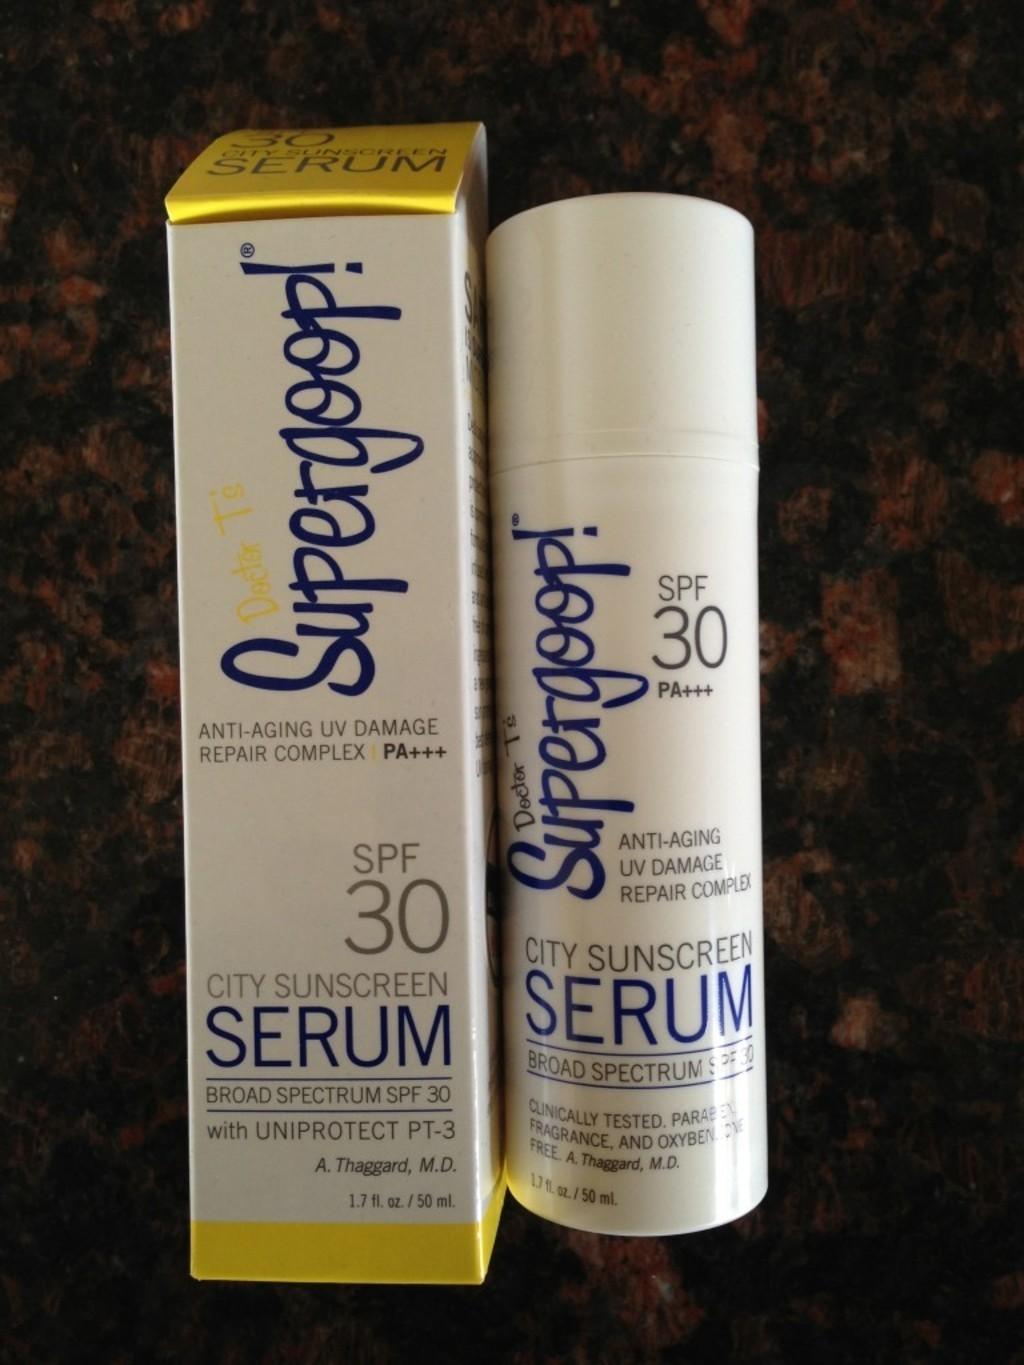 Supergoop SPF 30+ City Sunscreen Serum With Uniprotect PT-3